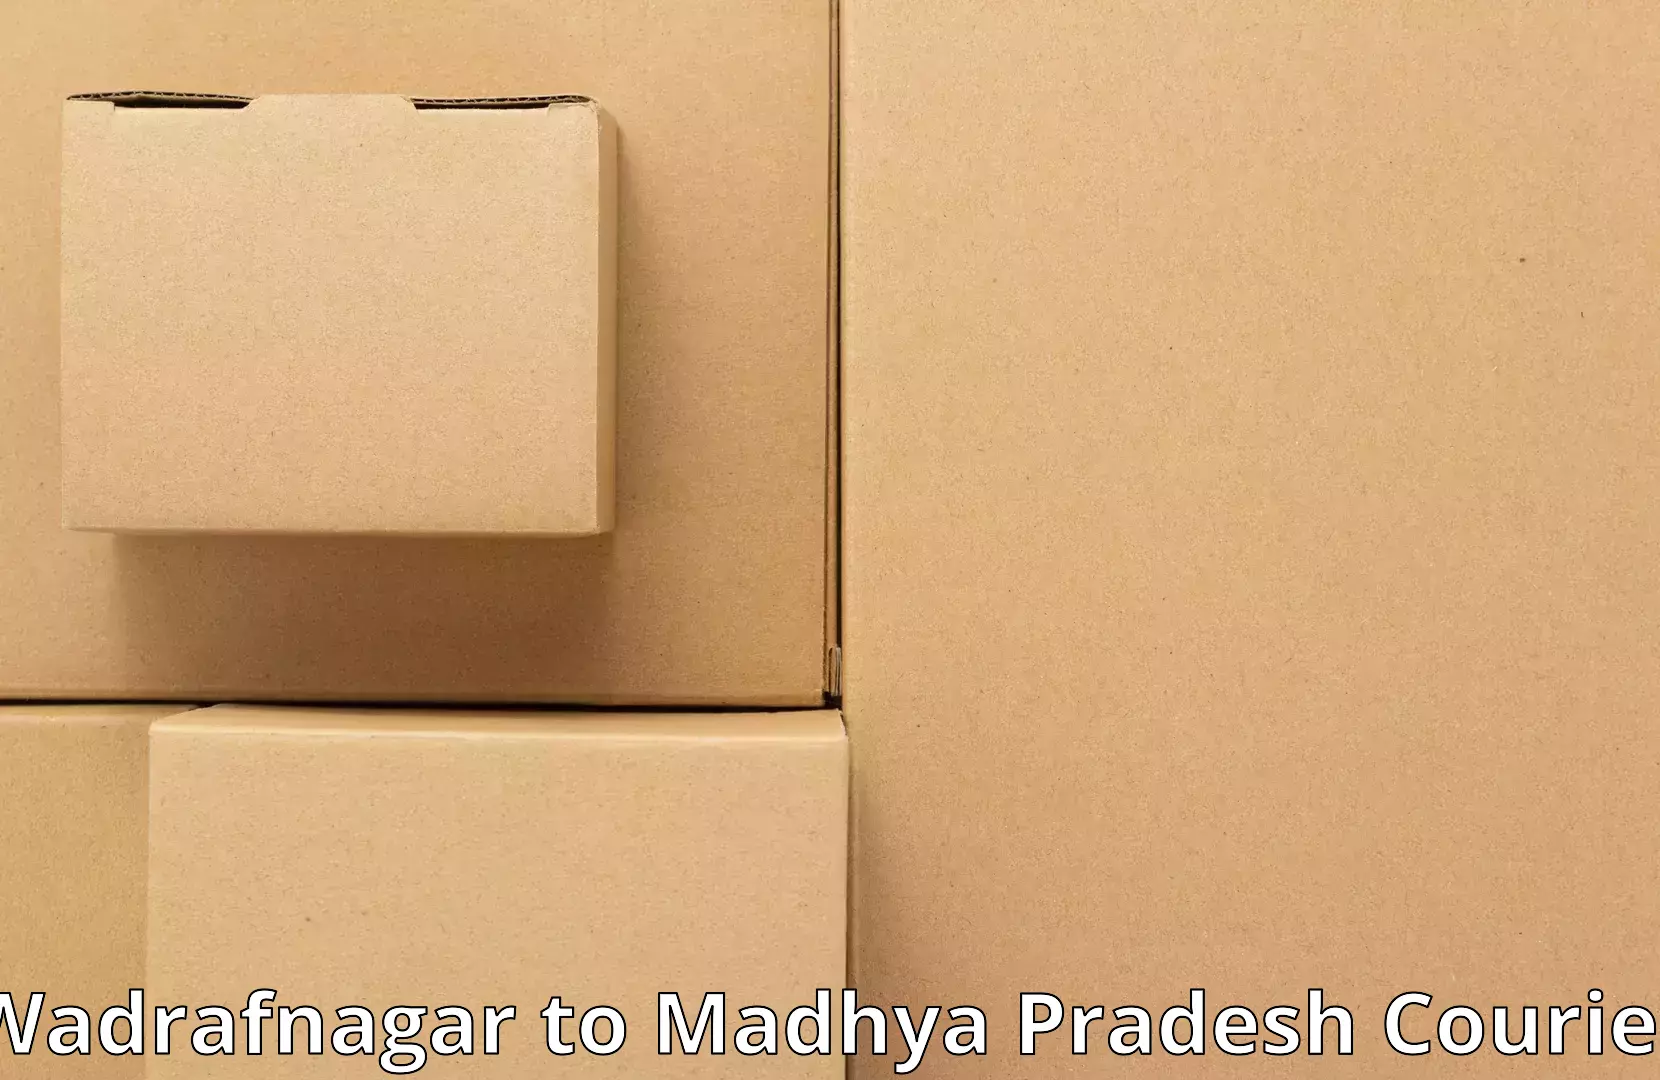 Trusted relocation experts Wadrafnagar to Bhopal